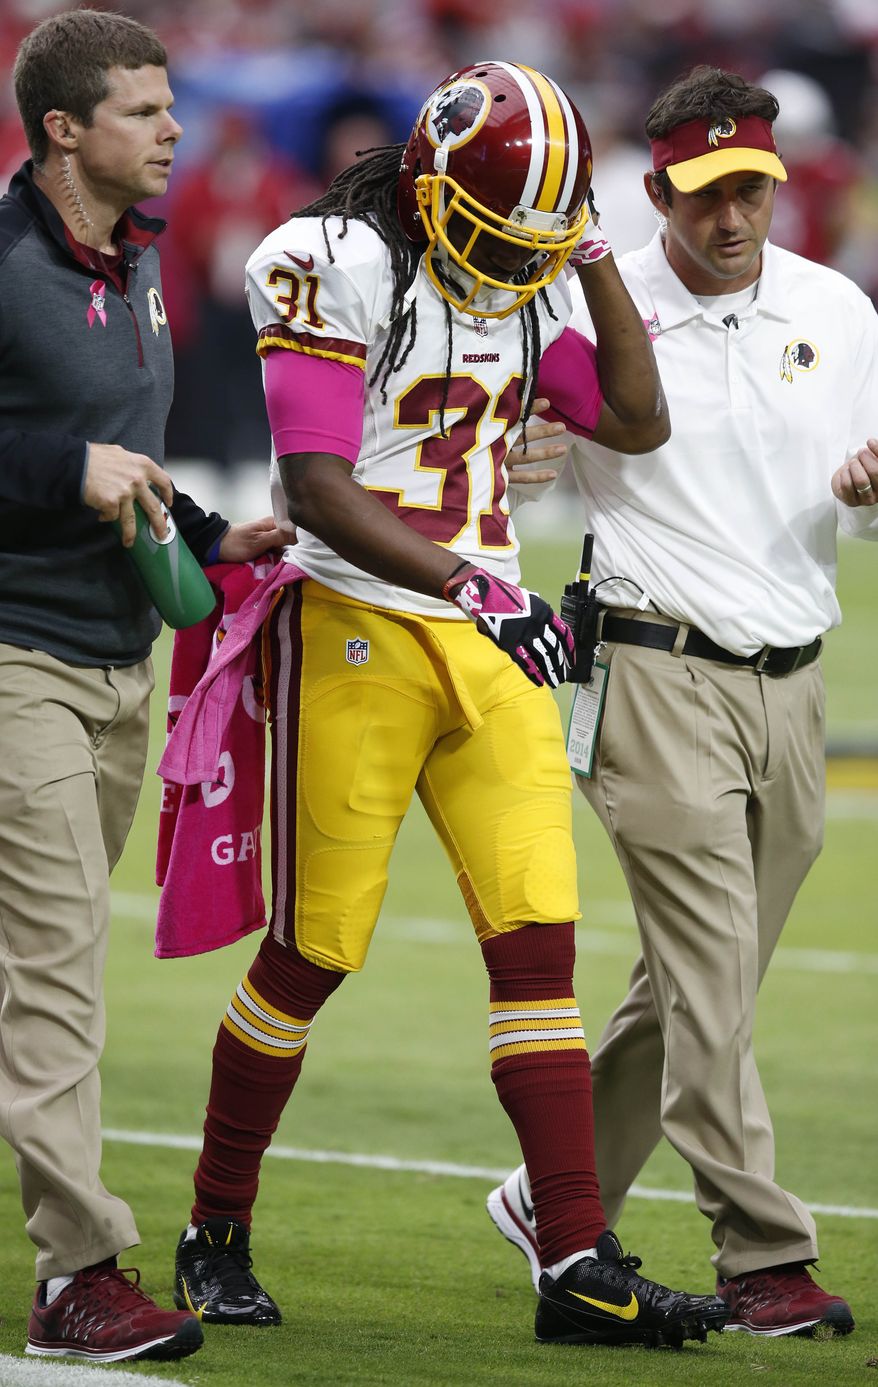 Washington Redskins strong safety Brandon Meriweather leaves the field after being injured against the Arizona Cardinals during the first half of an NFL football game, Sunday, Oct. 12, 2014, in Glendale, Ariz.(AP Photo/Ross D. Franklin) 
